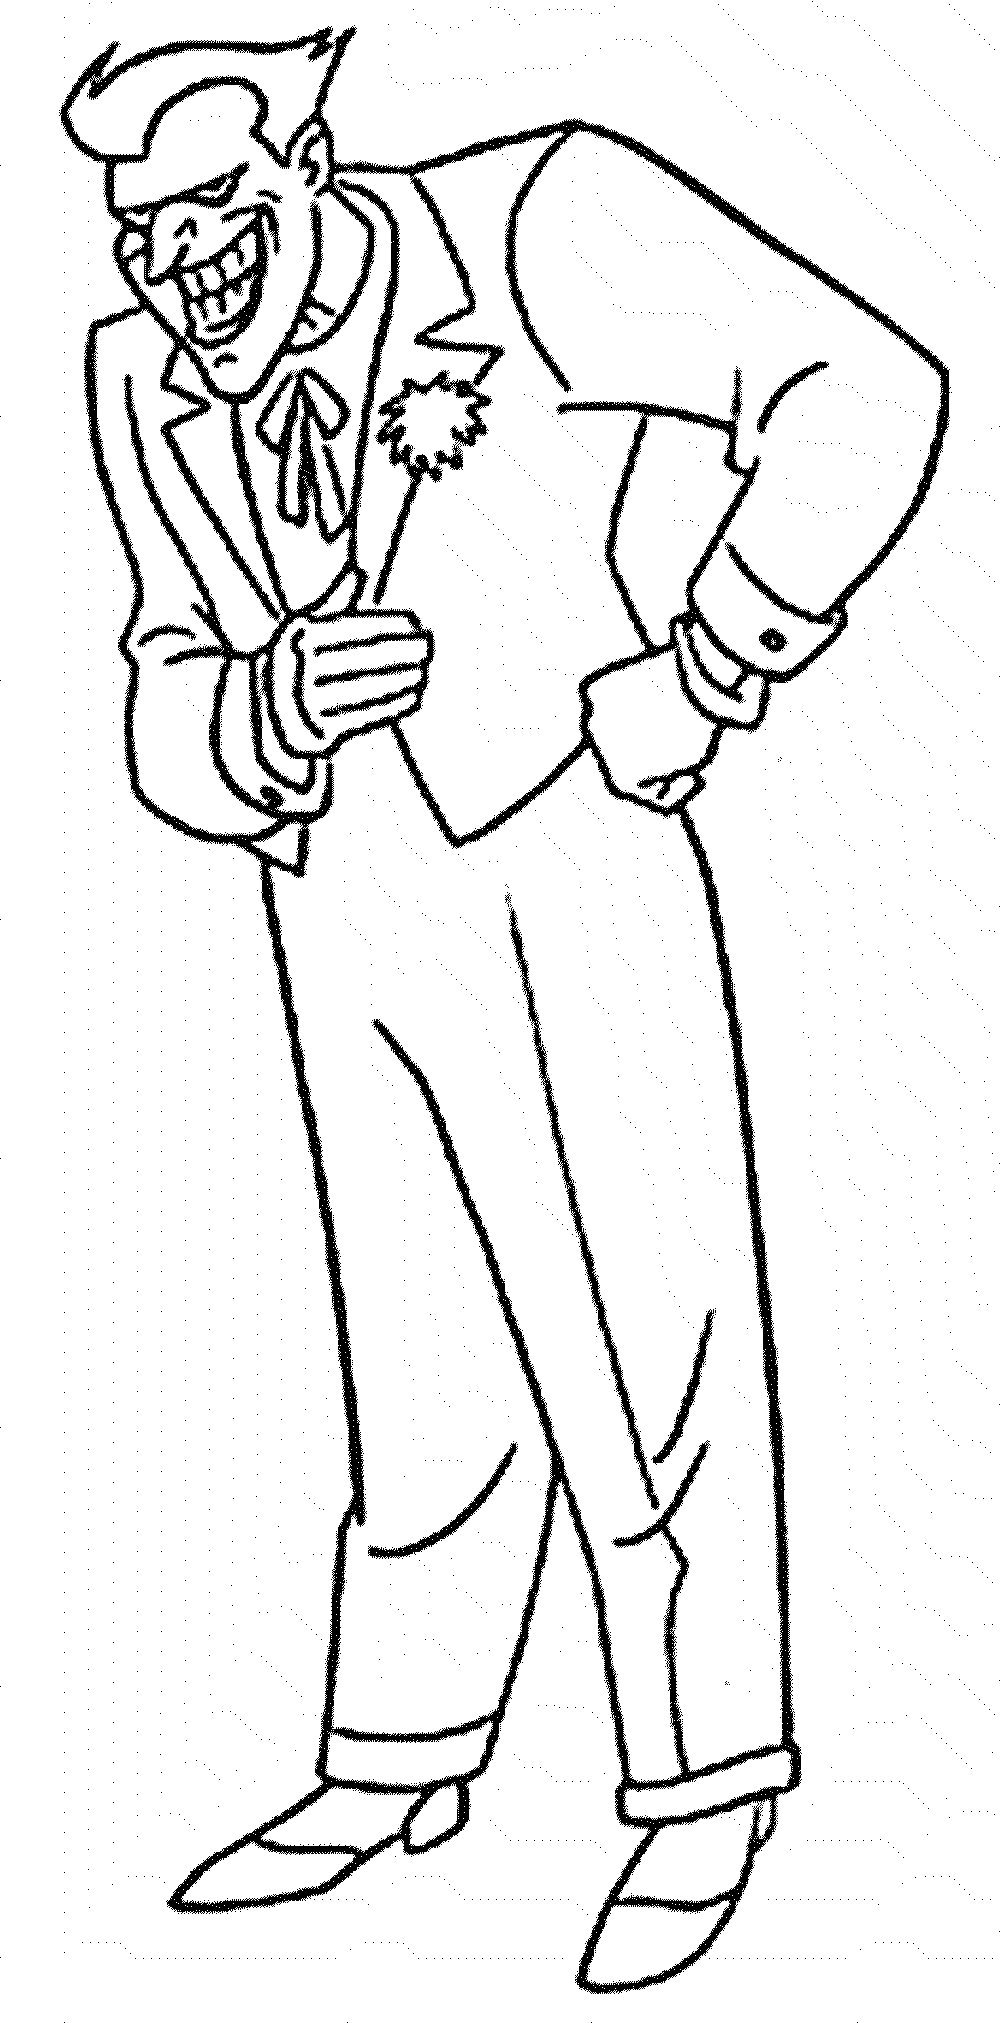 joker-printable-coloring-pages